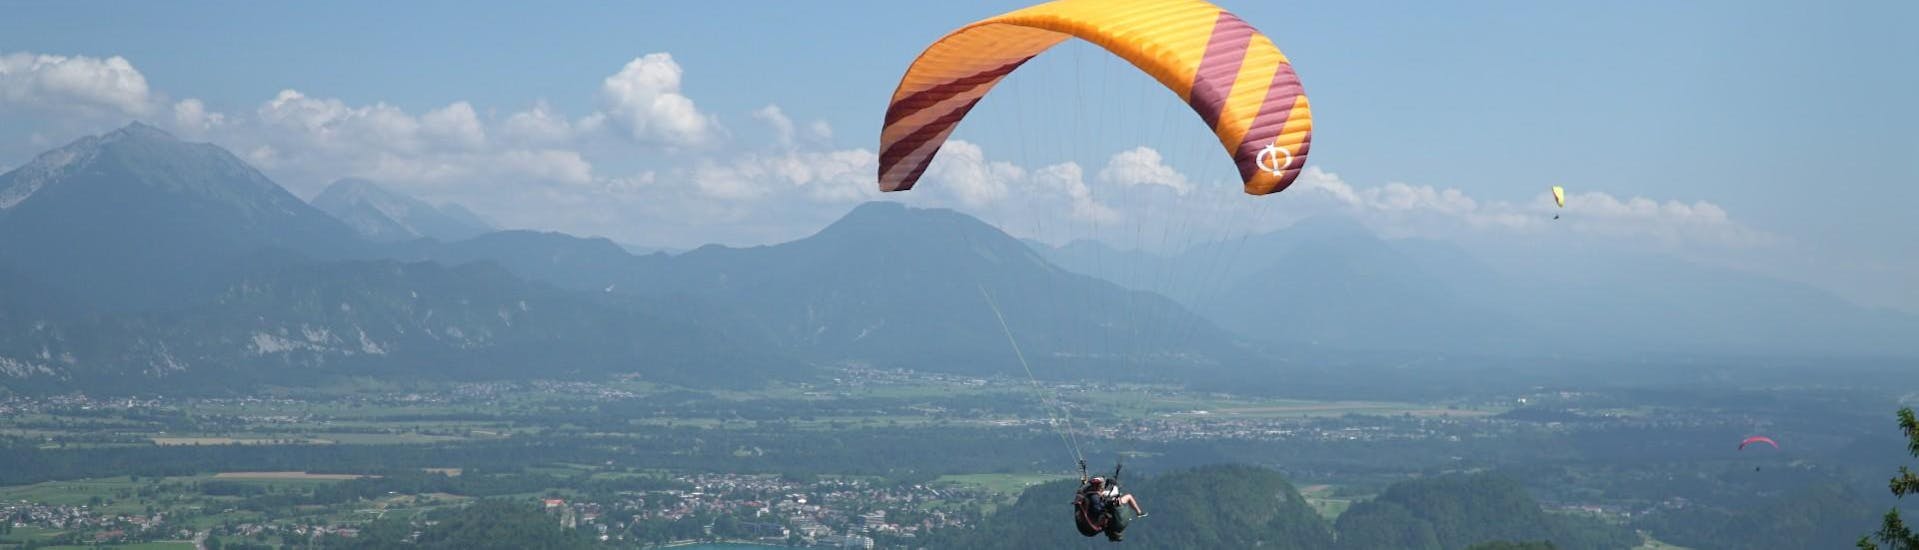 A pilot and a customer glide through the air together during tandem paragliding and enjoy the view of Lake Bled.